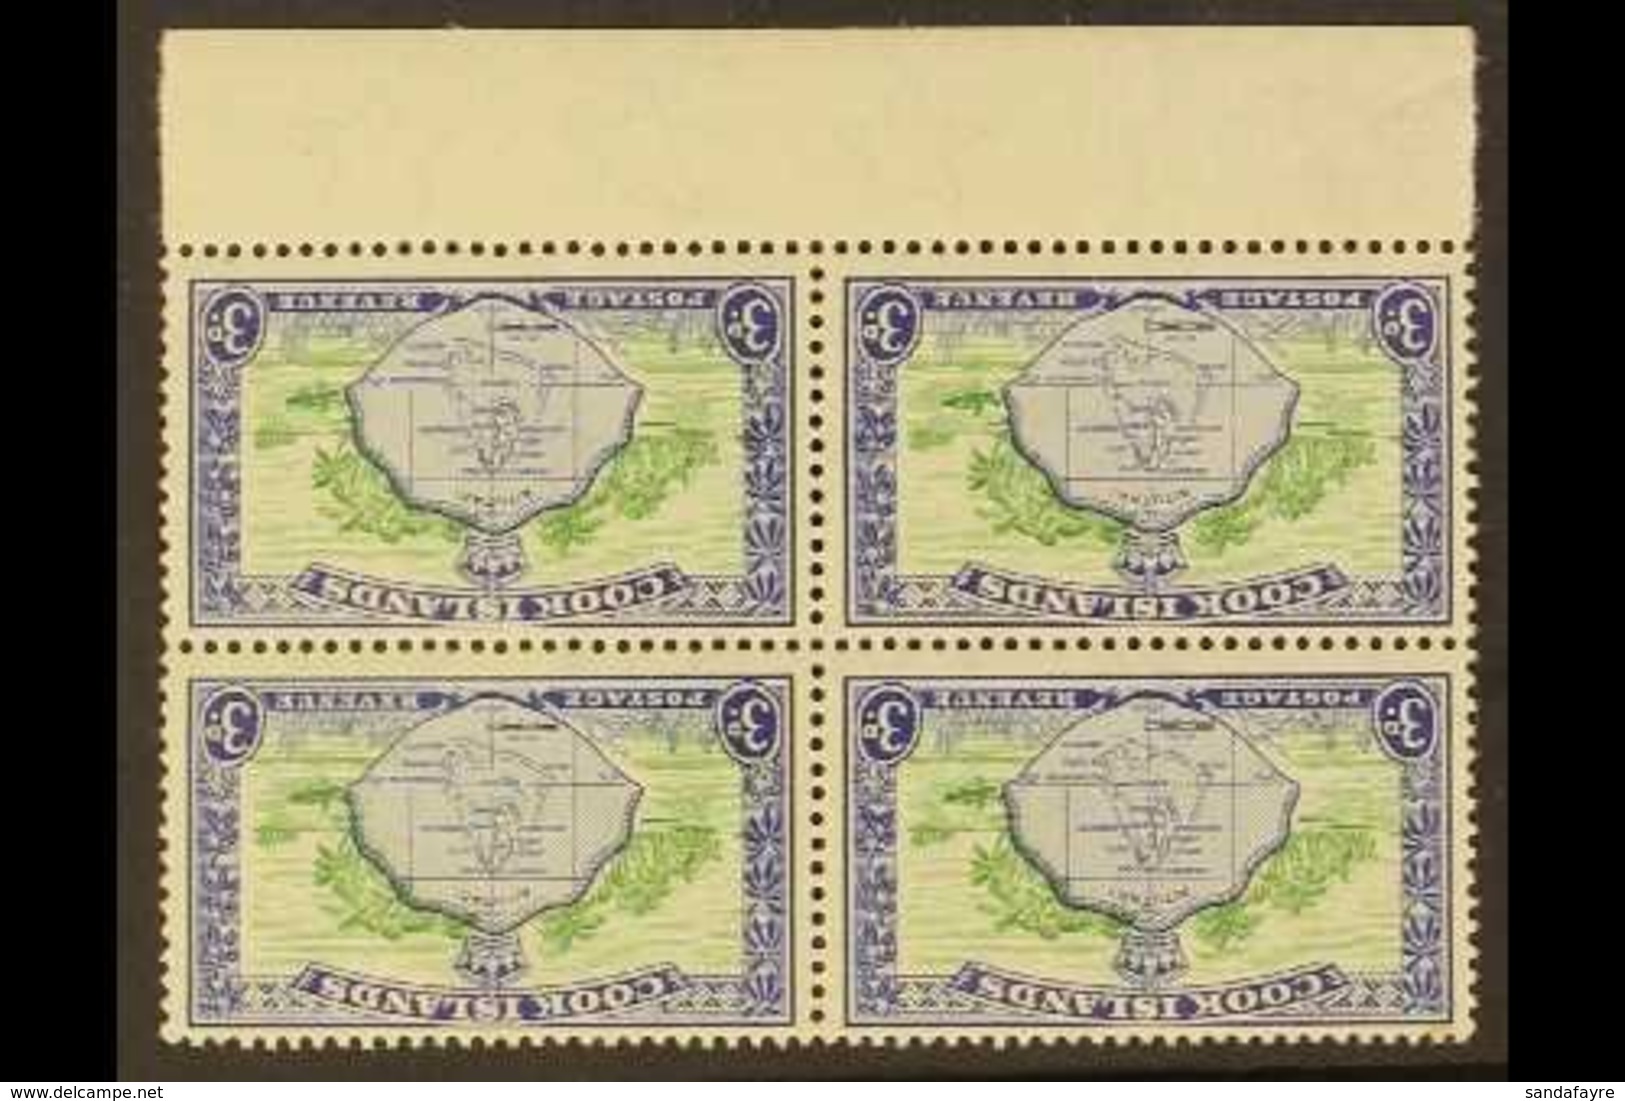 1949-61 3d Green & Ultramarine Pictorial With WATERMARK INVERTED Variety, SG 153aw, Very Fine Mint Lower Marginal BLOCK  - Cook Islands